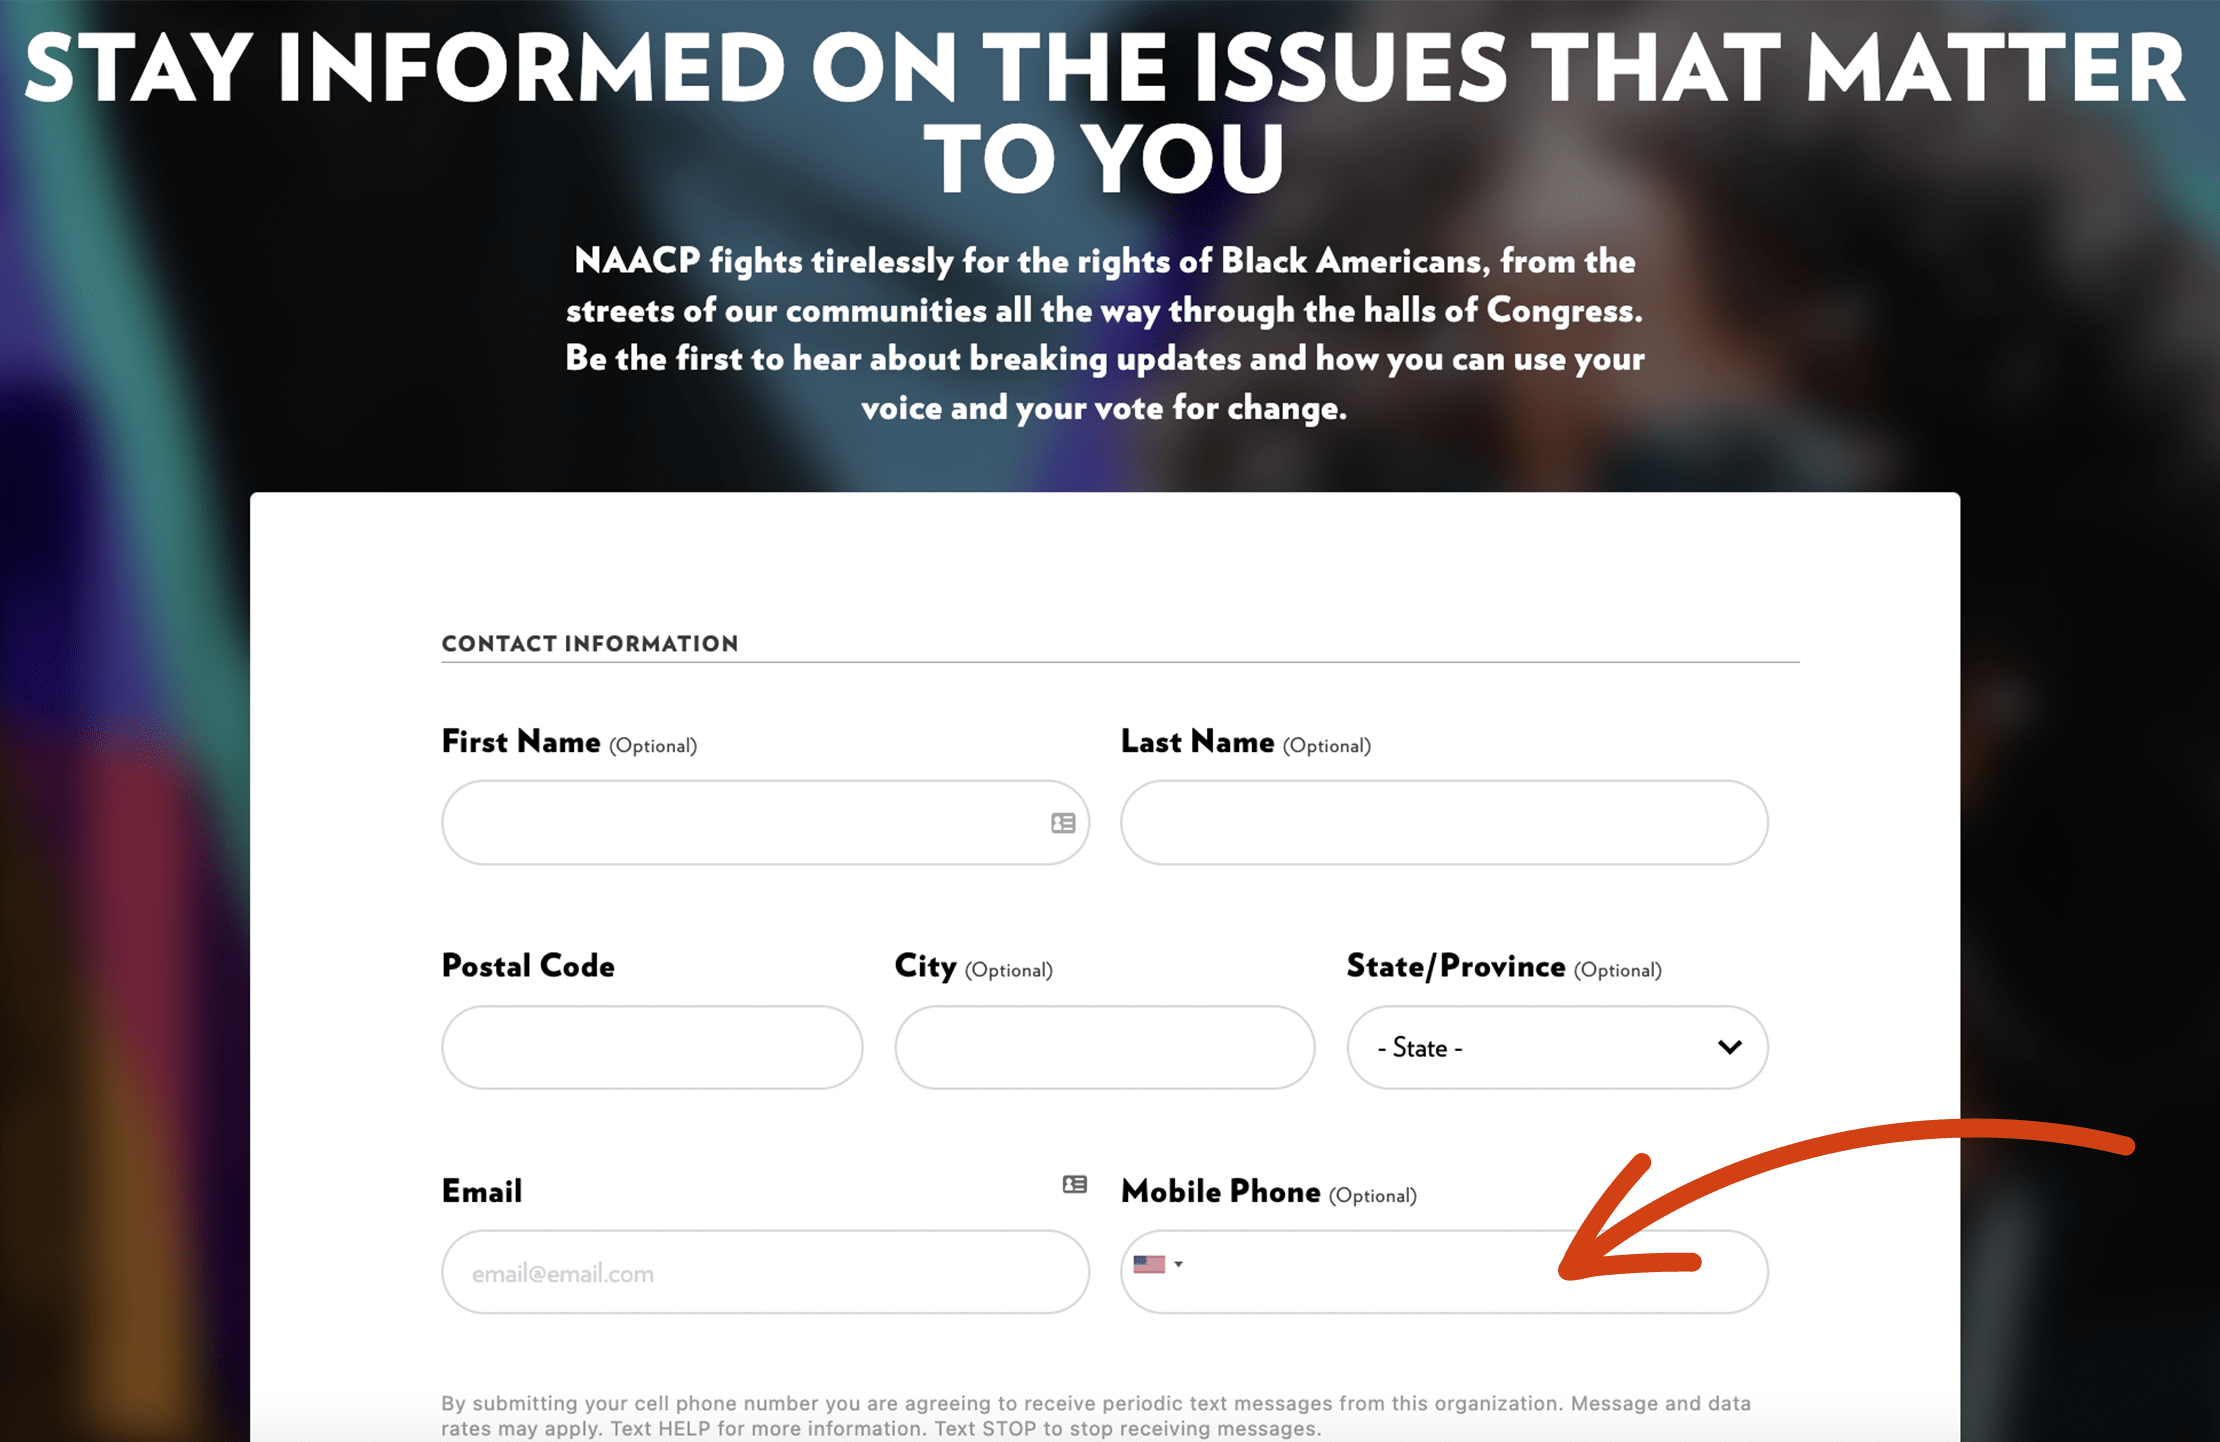 NAACP website asks supporters to share their phone numbers